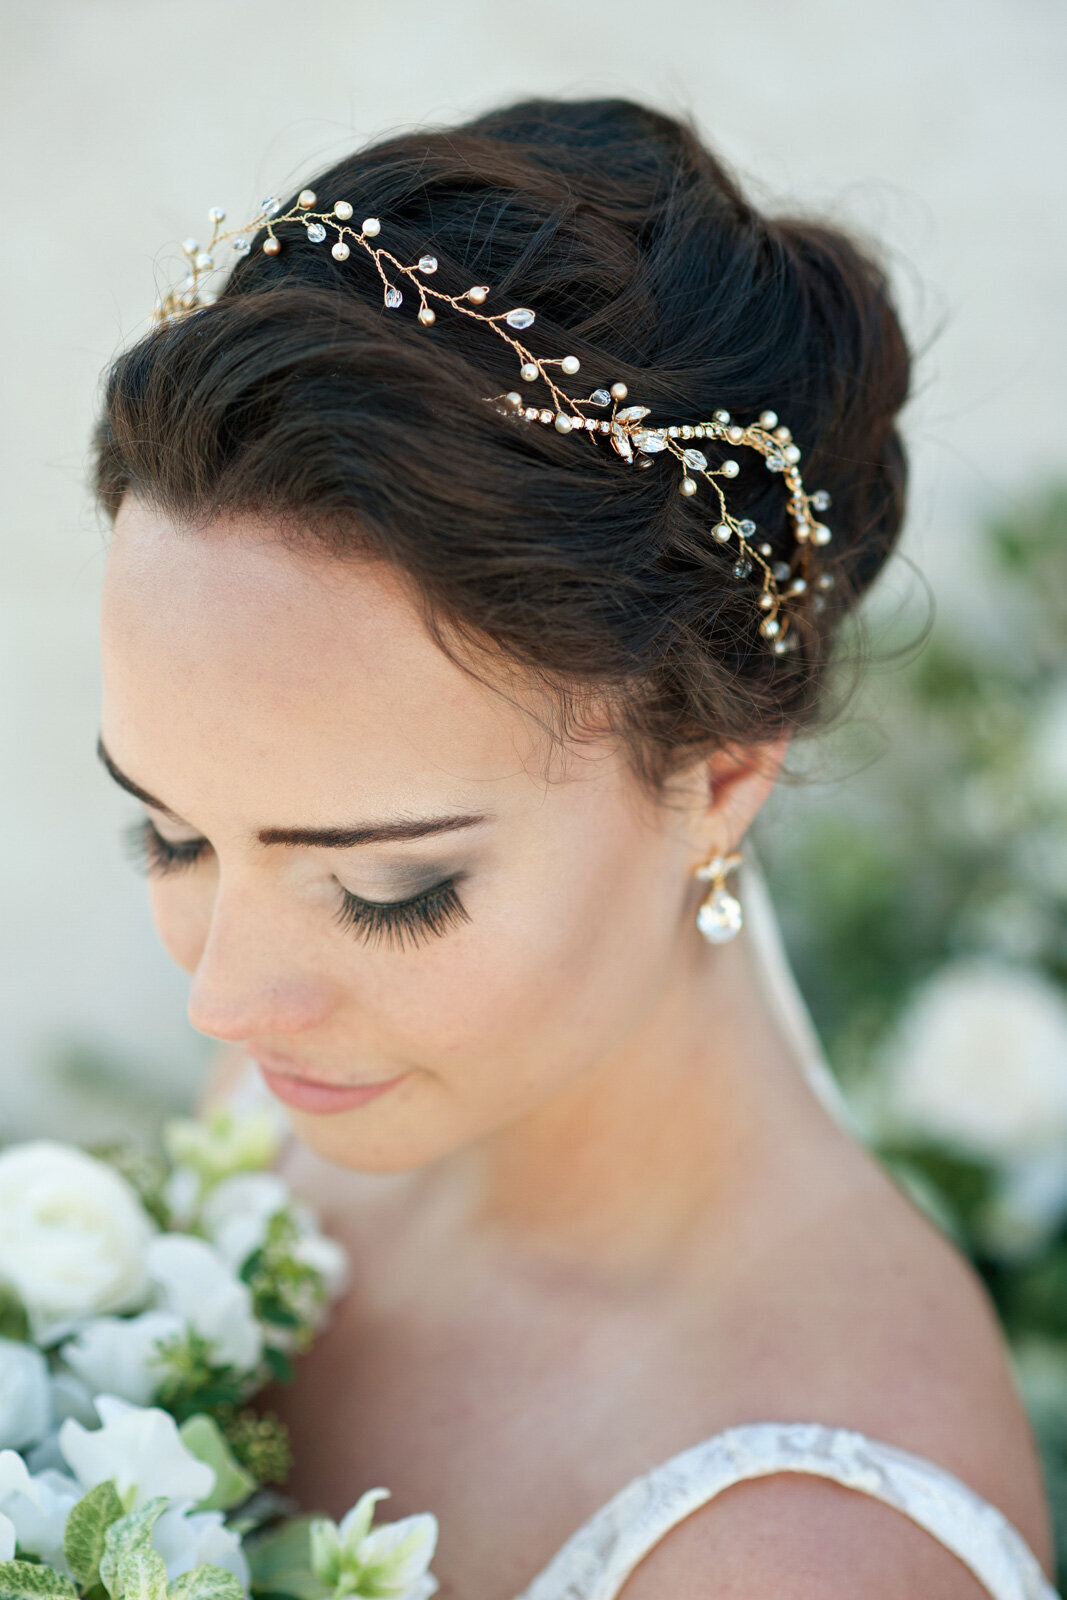 Delicate gold hairpiece with white pearls, by Joanna Bisley Designs, romantic and modern wedding jeweler based in Calgary, Alberta.  Featured on the Brontë Bride Vendor Guide.